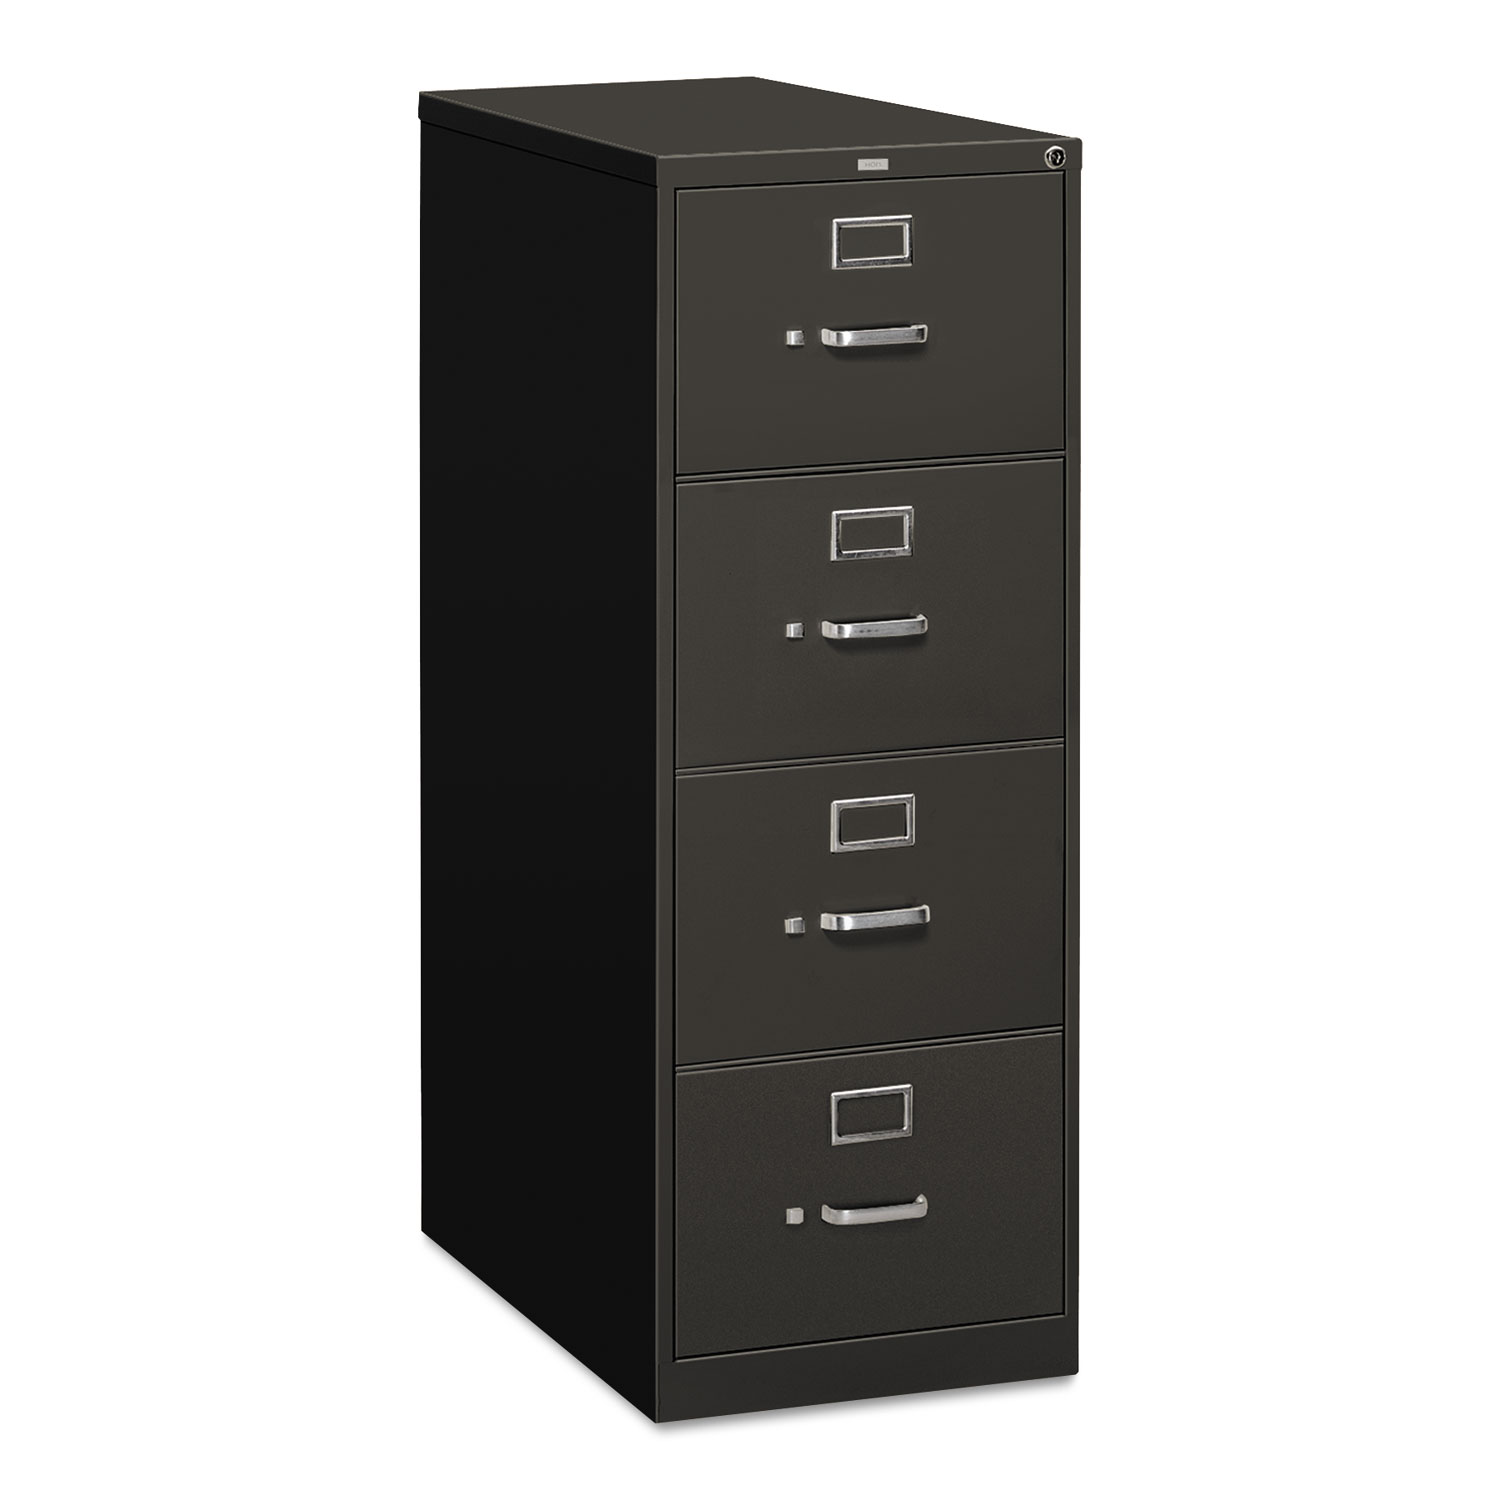 310 Series Four-Drawer, Full-Suspension File, Legal, 26-1/2d, Charcoal